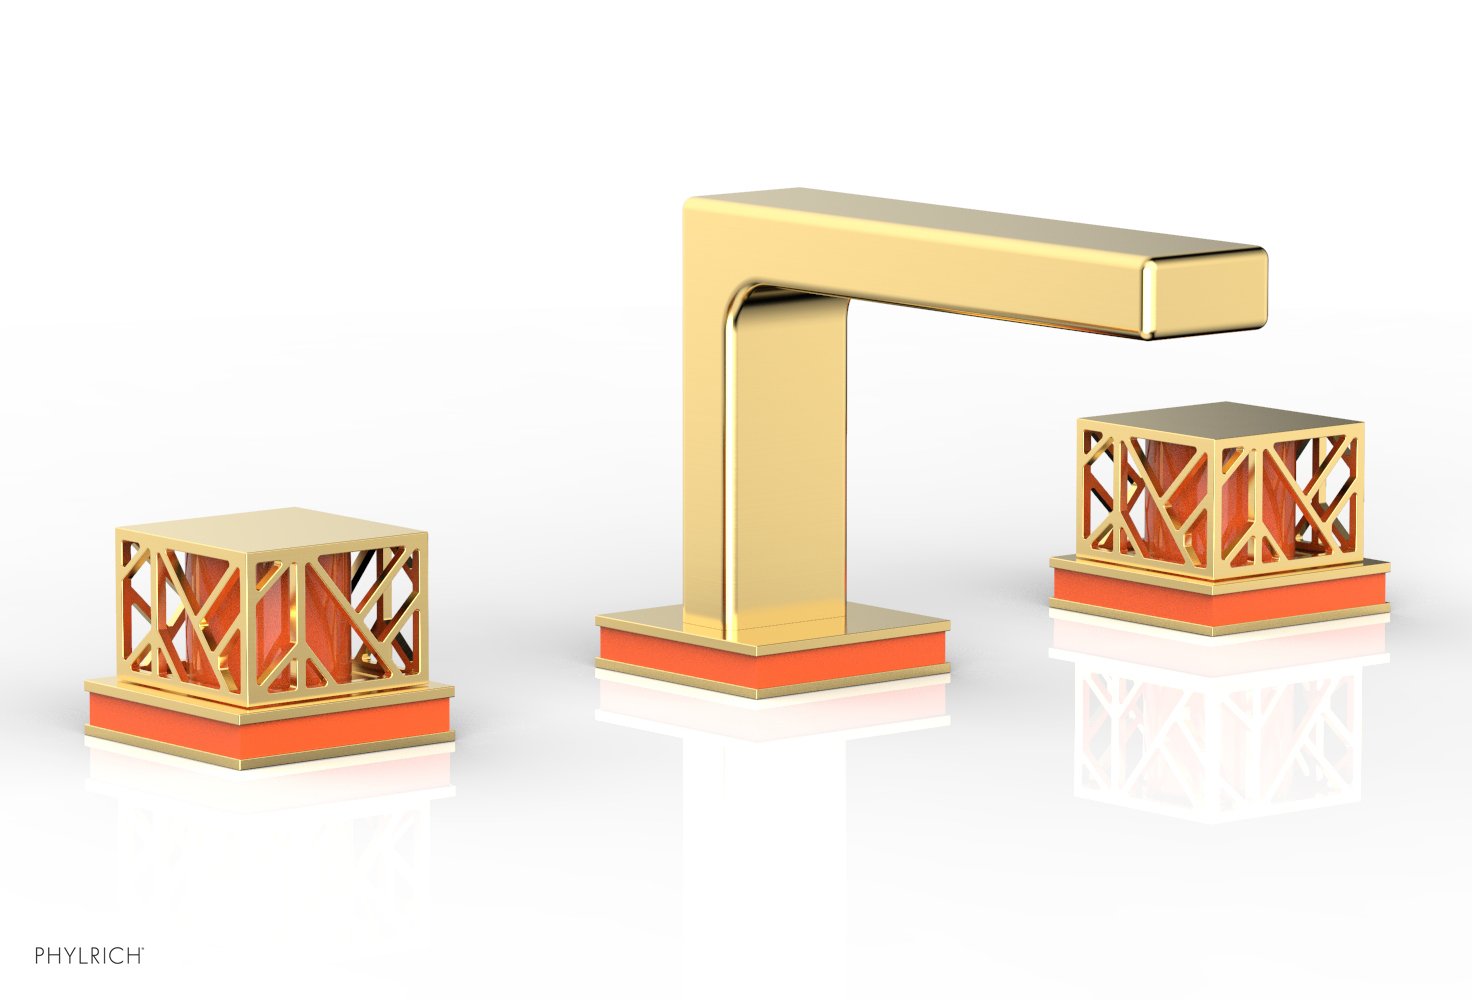 Phylrich JOLIE Widespread Faucet - Square Handles with "Orange" Accents